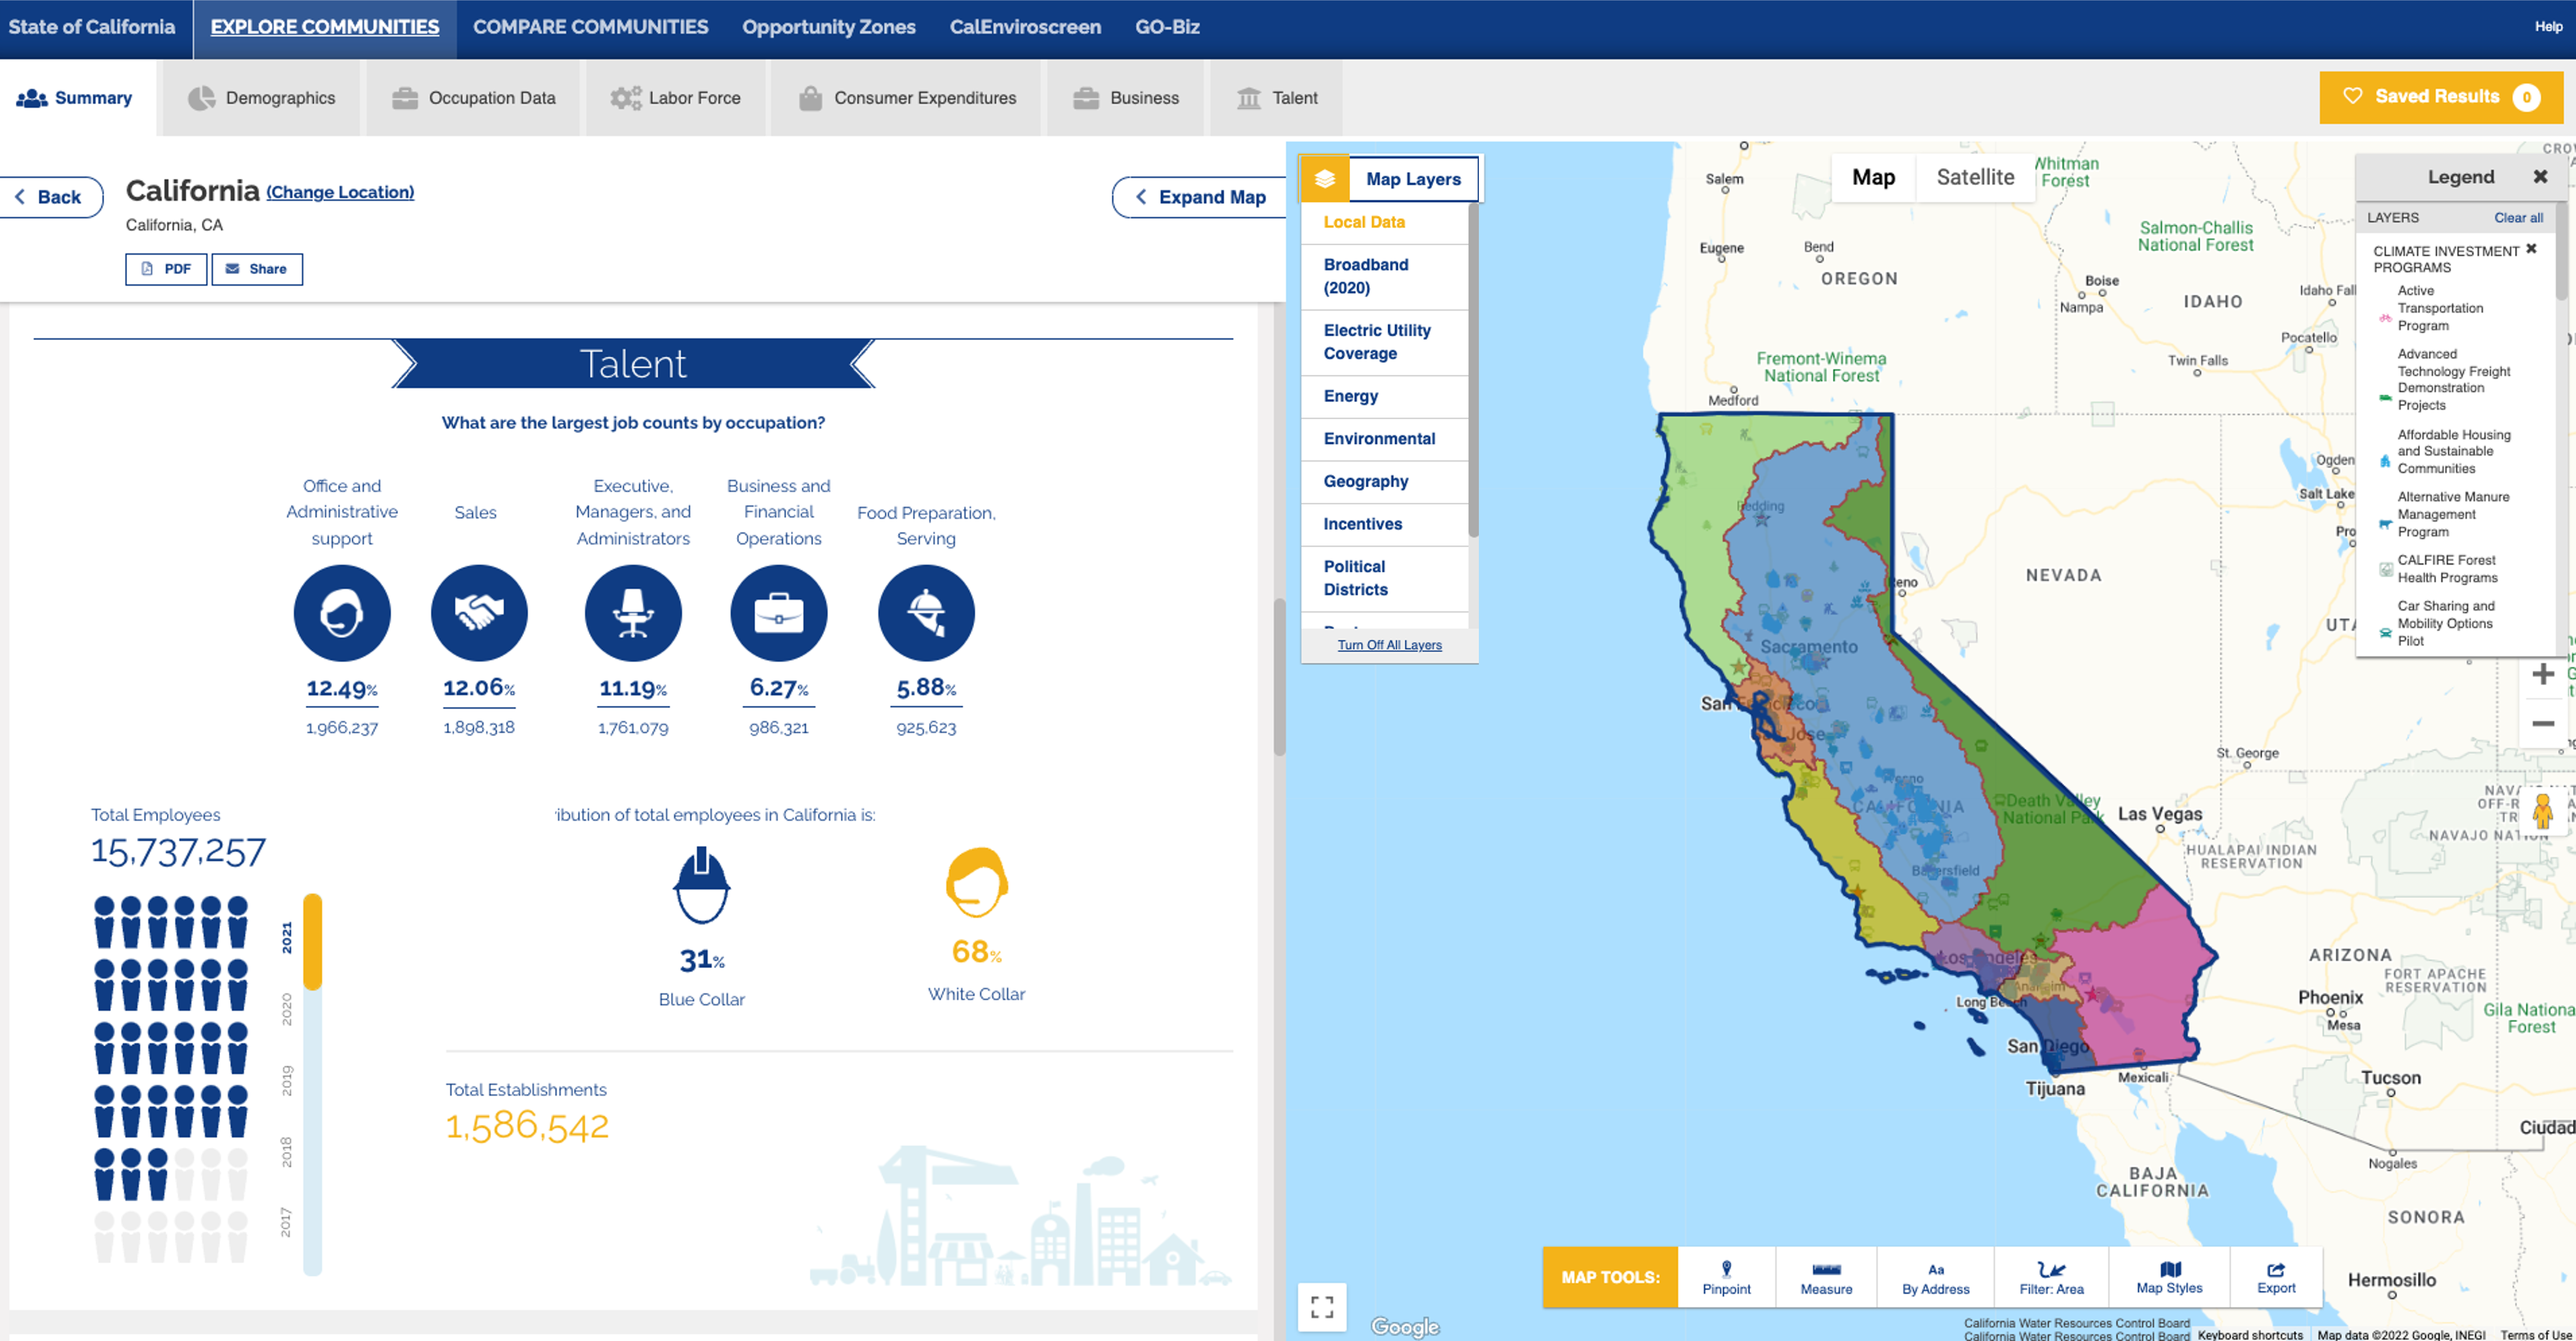 California community and place based GIS data research tool